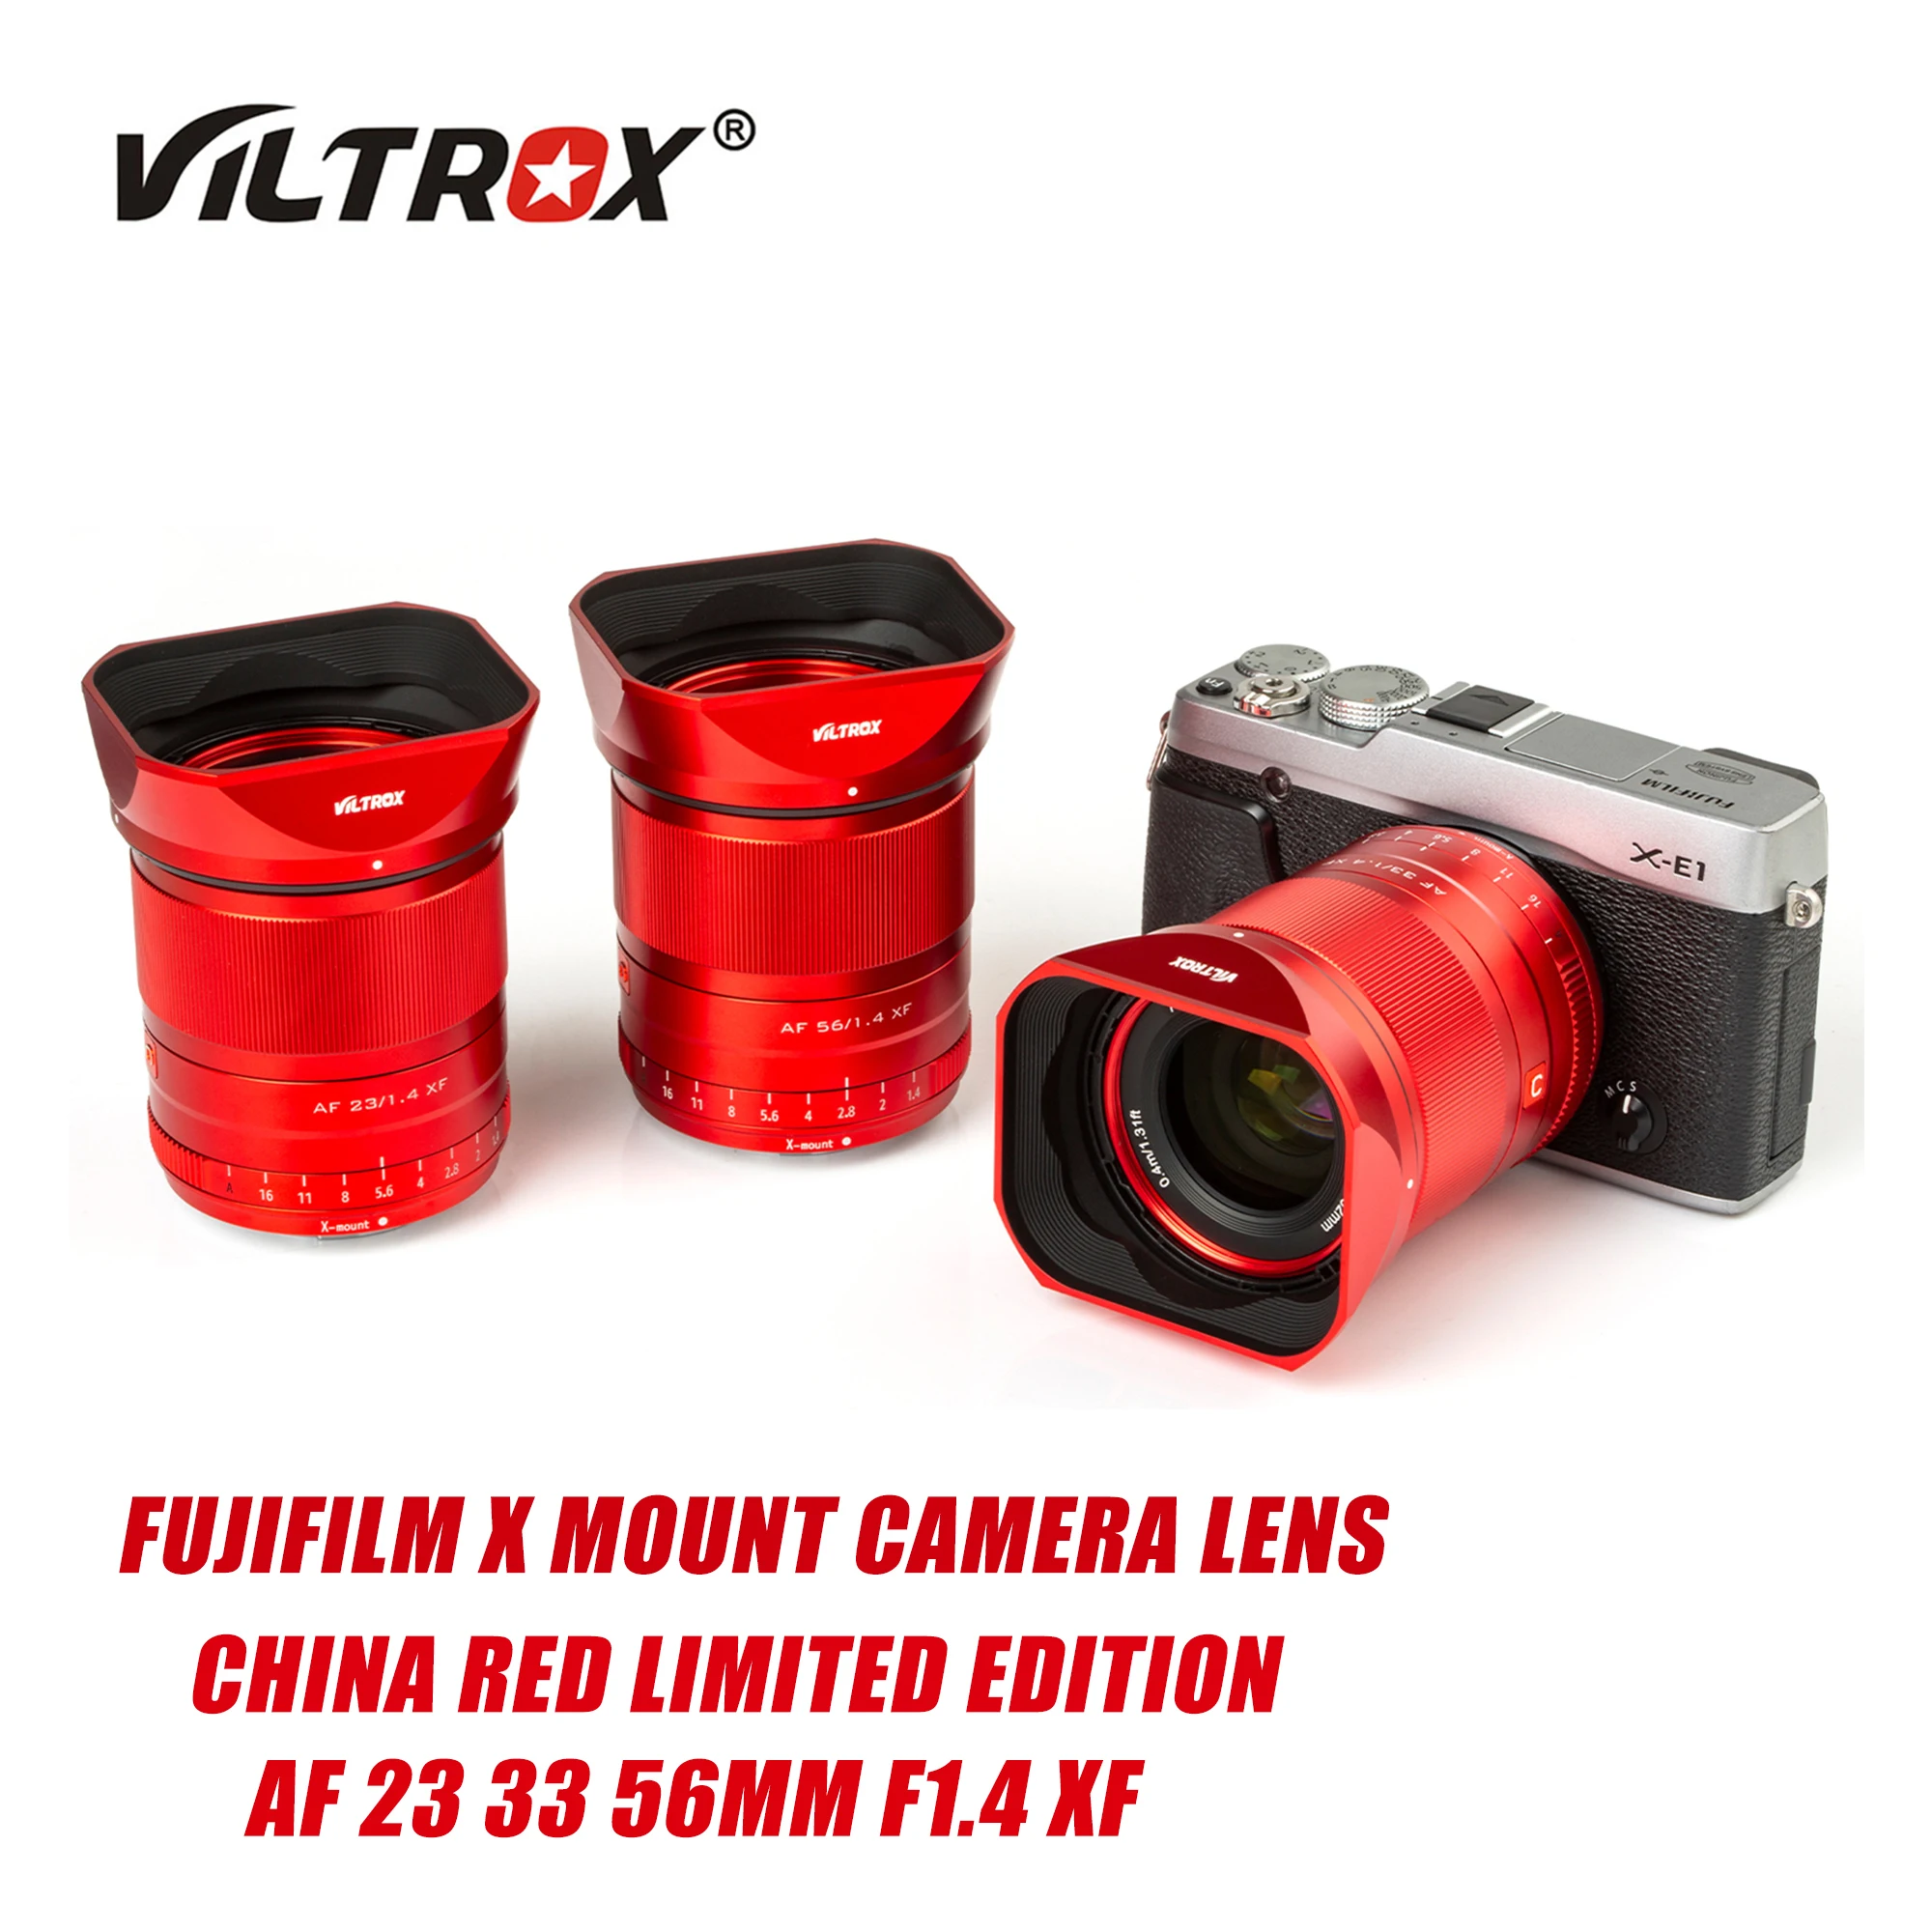 

GLOBAL LIMITED EDITION Viltrox 23mm 33mm 56mm F1.4 XF Red Auto Focus Portrait Lenses For Fujifilm Fuji X Mount Camera Lens